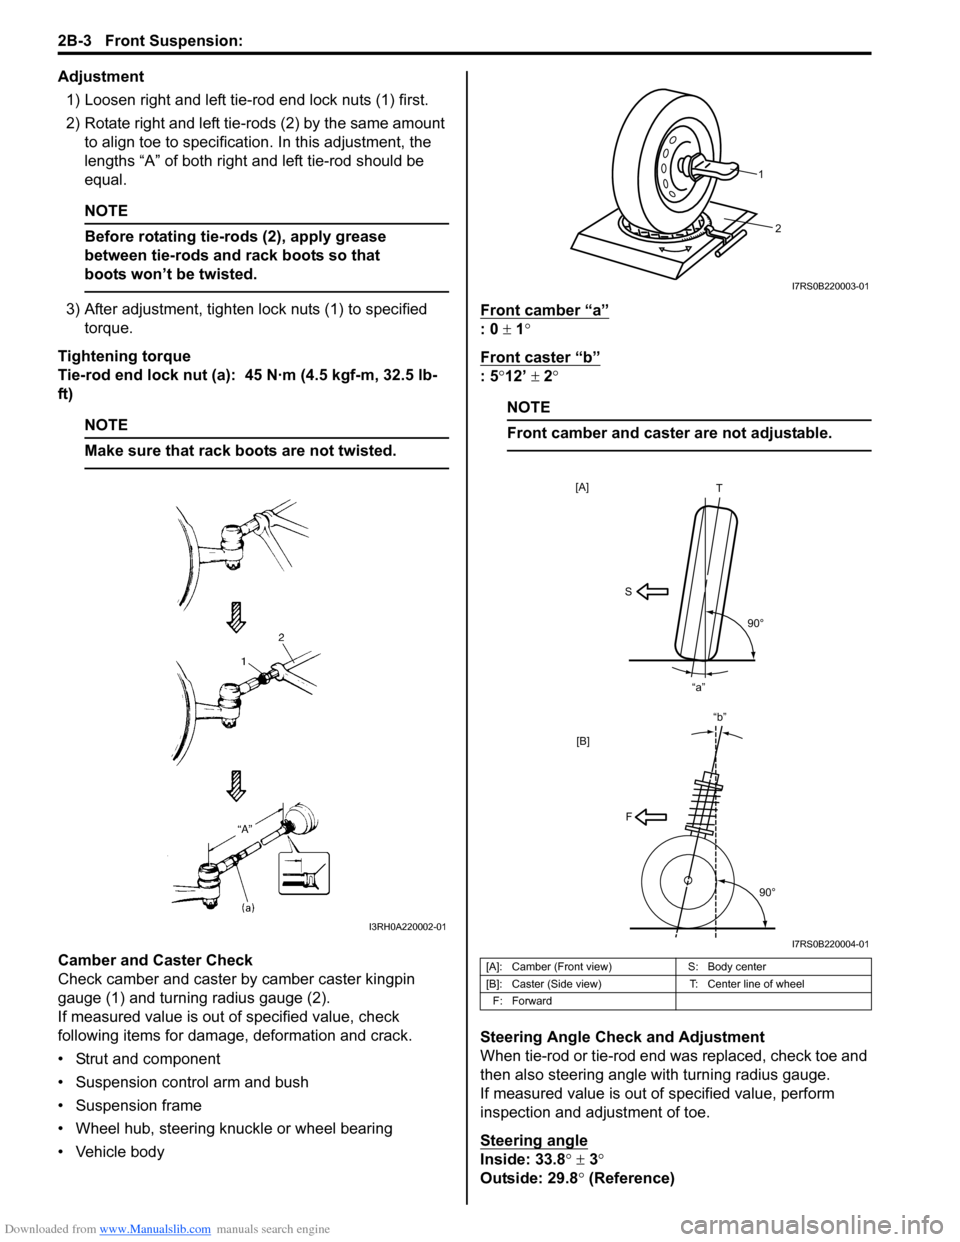 SUZUKI SWIFT 2005 2.G Service Workshop Manual Downloaded from www.Manualslib.com manuals search engine 2B-3 Front Suspension: 
Adjustment1) Loosen right and left tie-rod end lock nuts (1) first.
2) Rotate right and left tie-rods (2) by the same a